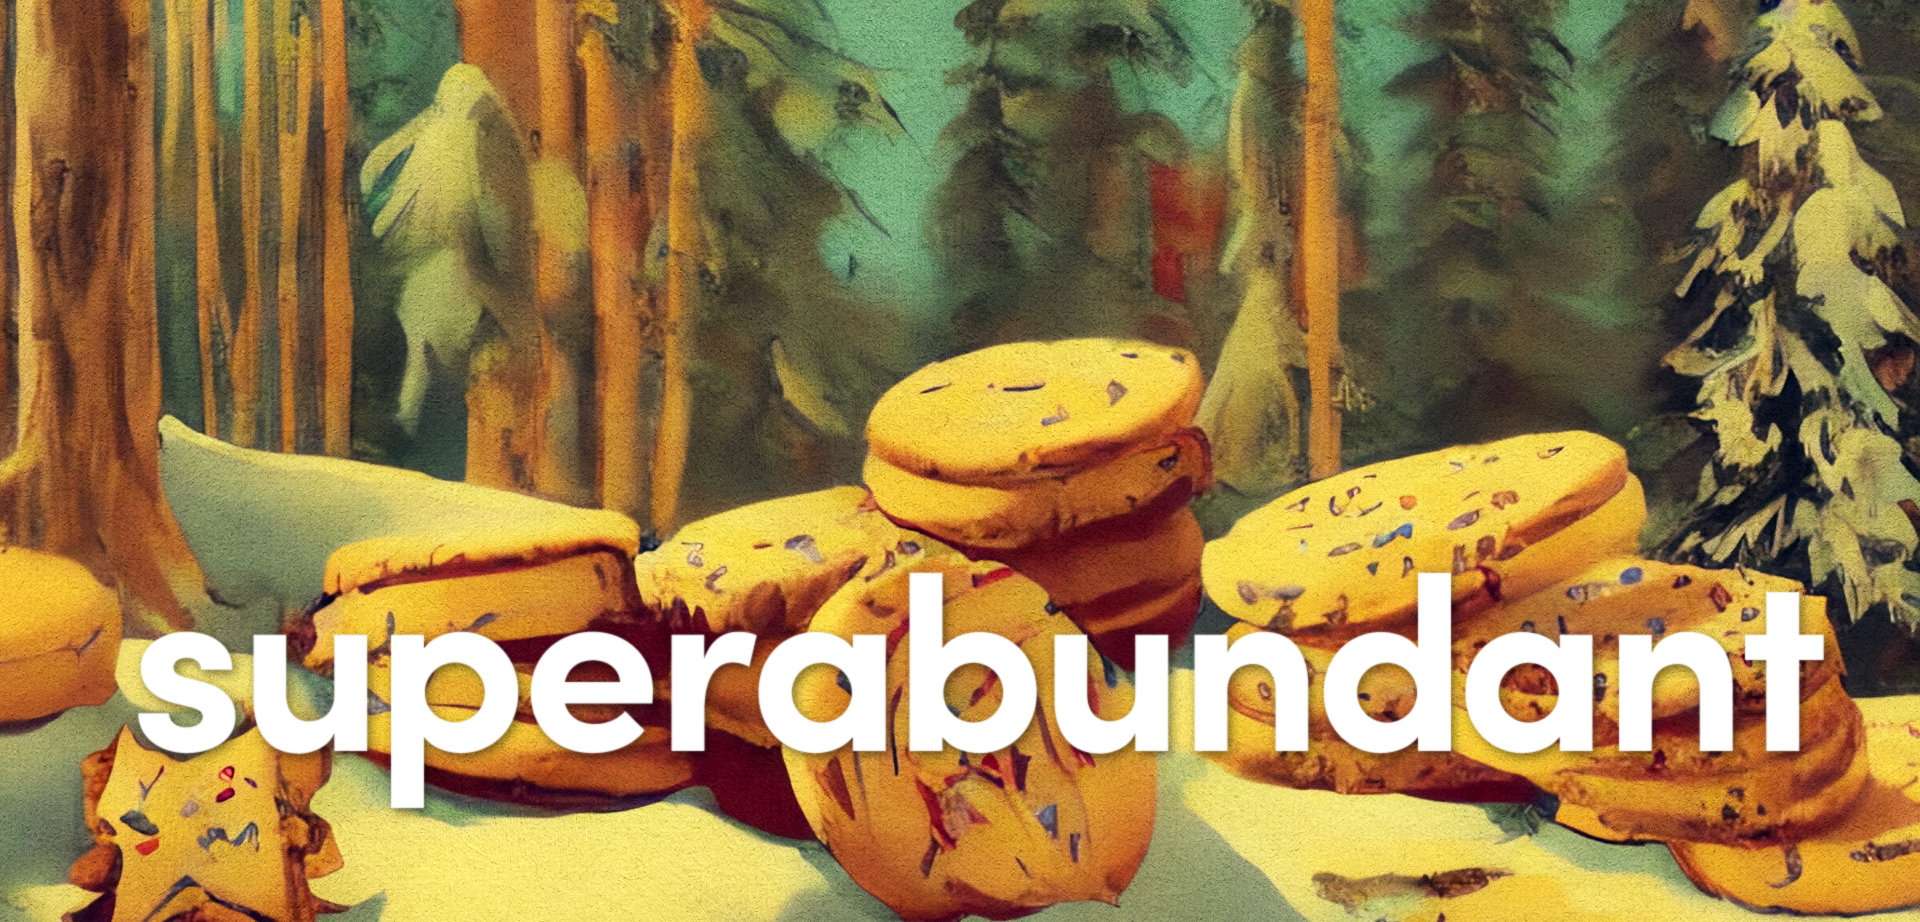 Image generated by Stable Diffusion AI using prompt "sugar cookies, biscuits, gingerbread, frosting, oil painting, by Frederic Remington, timber, fir trees, beer, pacific northwest forest, landscape, good composition"